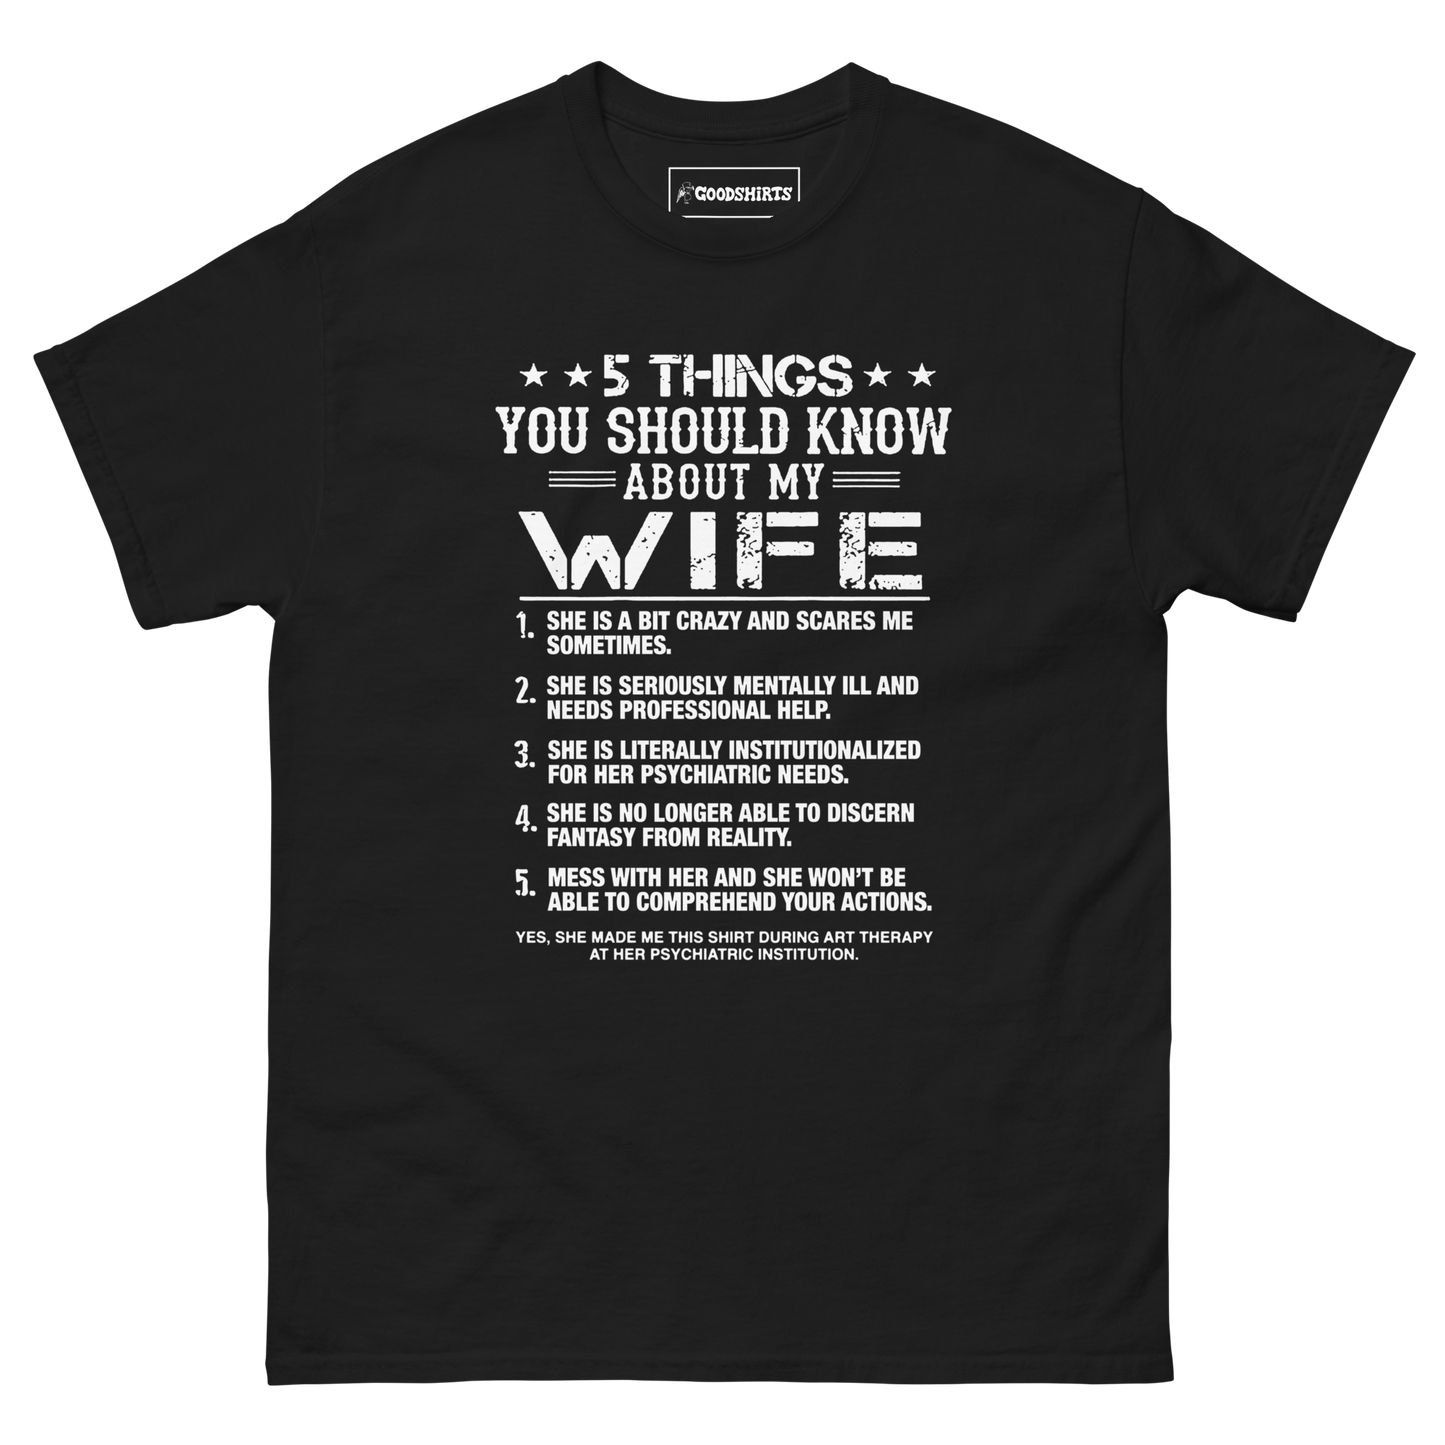 5 Things You Should Know About My Wife.